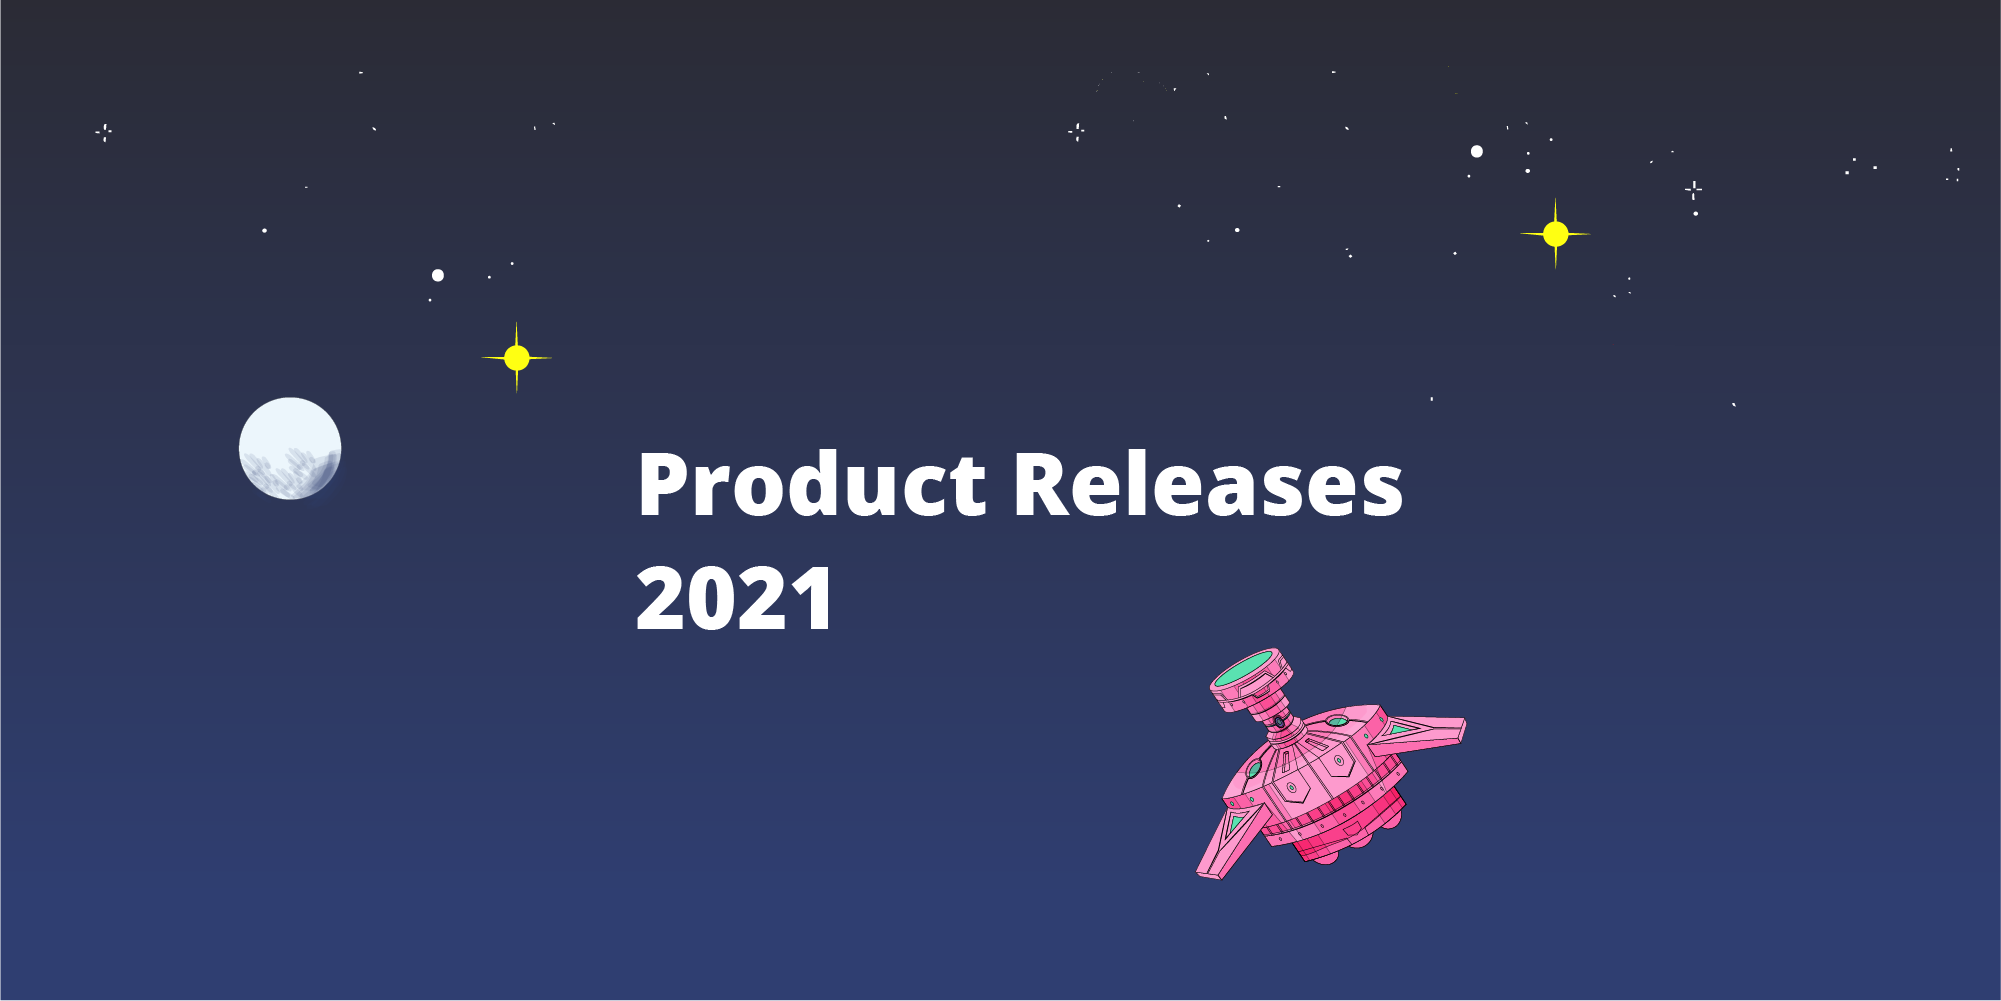 Product Releases 2021: A year in review